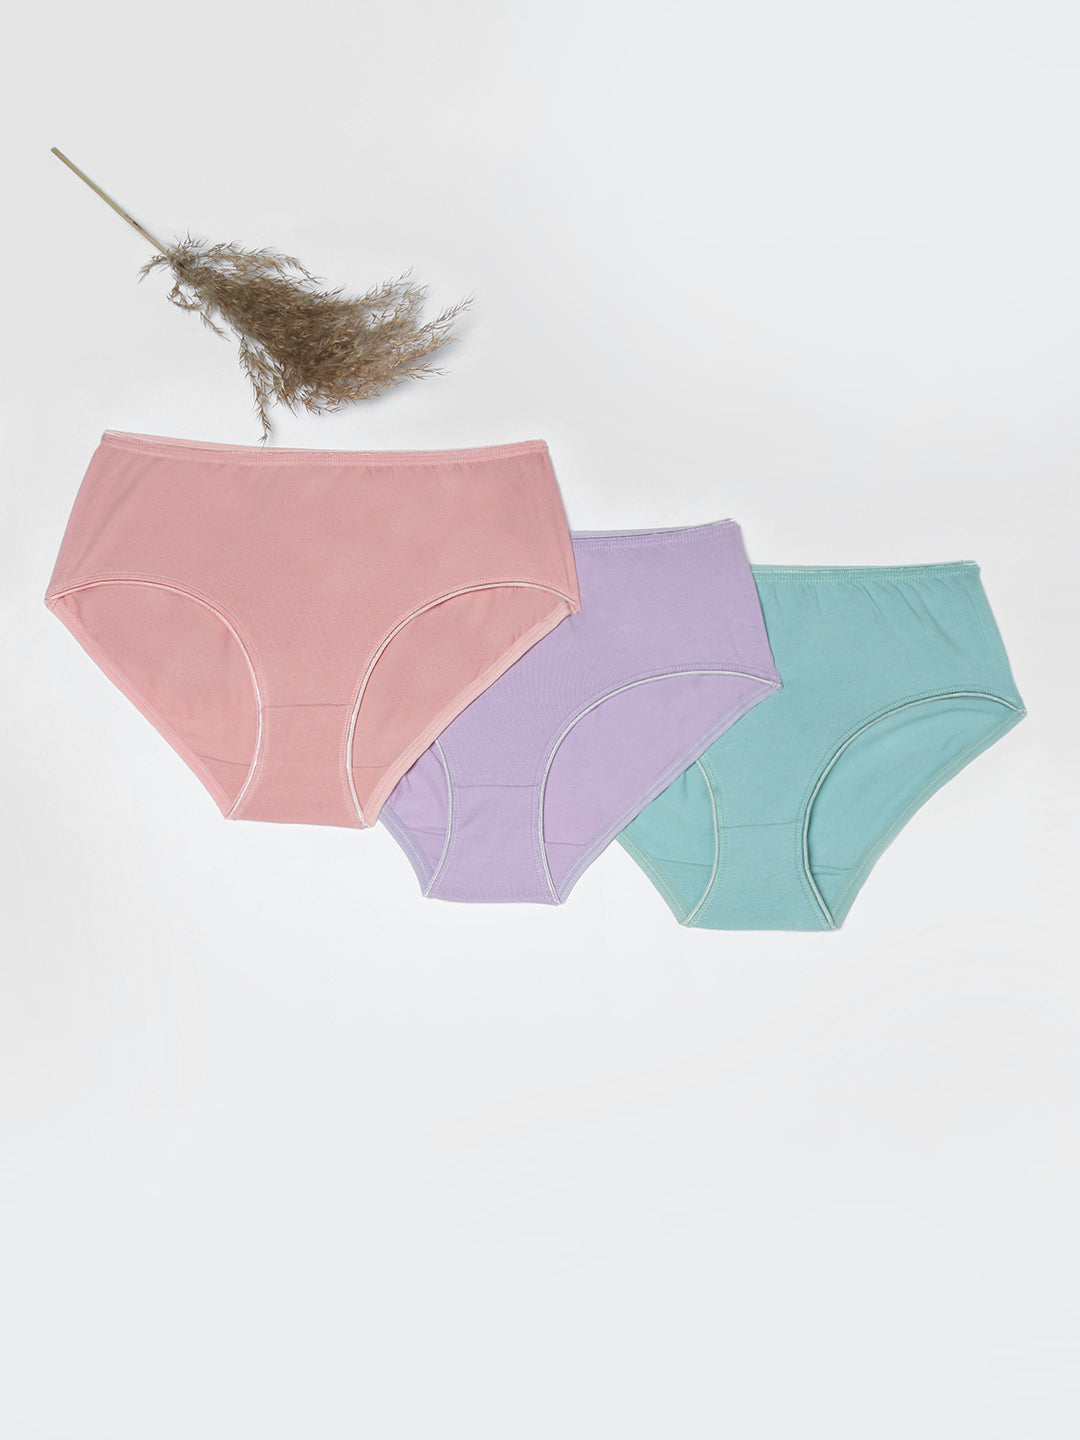 Shop Prisma's High Waist Panty Combo with OE-Outer Elastic - 7 Pack